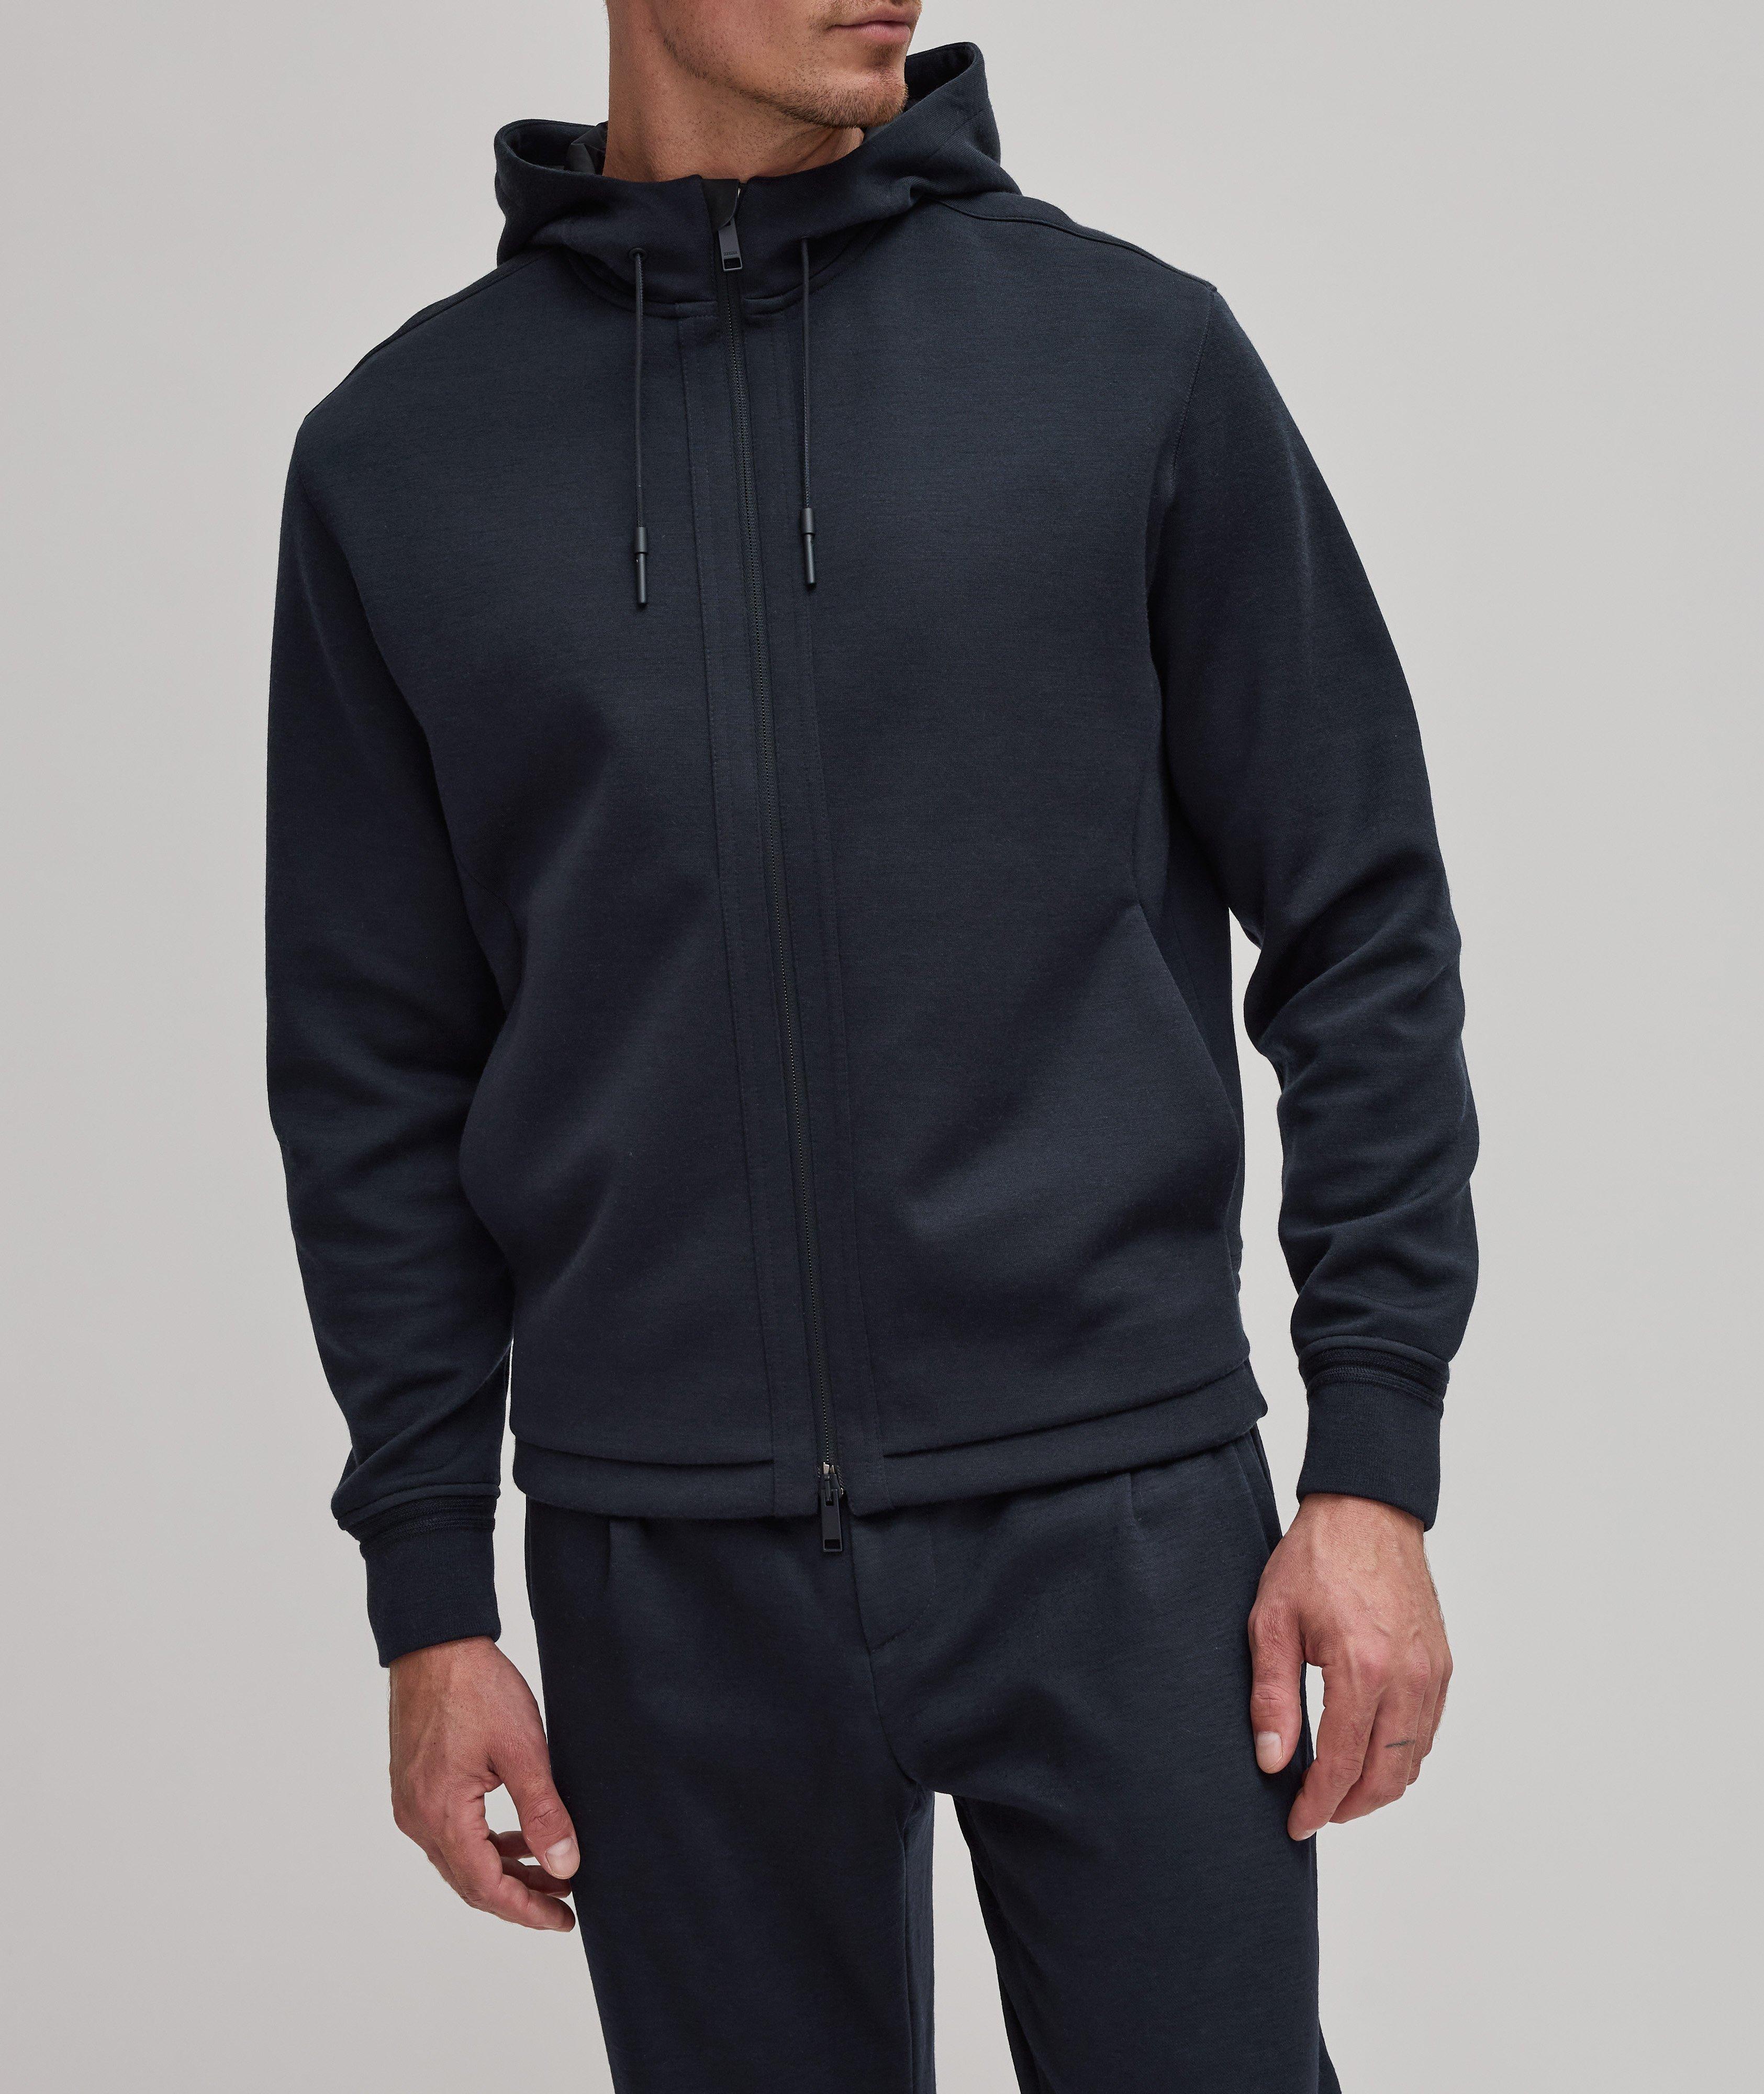 Full-Zip High Performance Hooded Sweater image 1